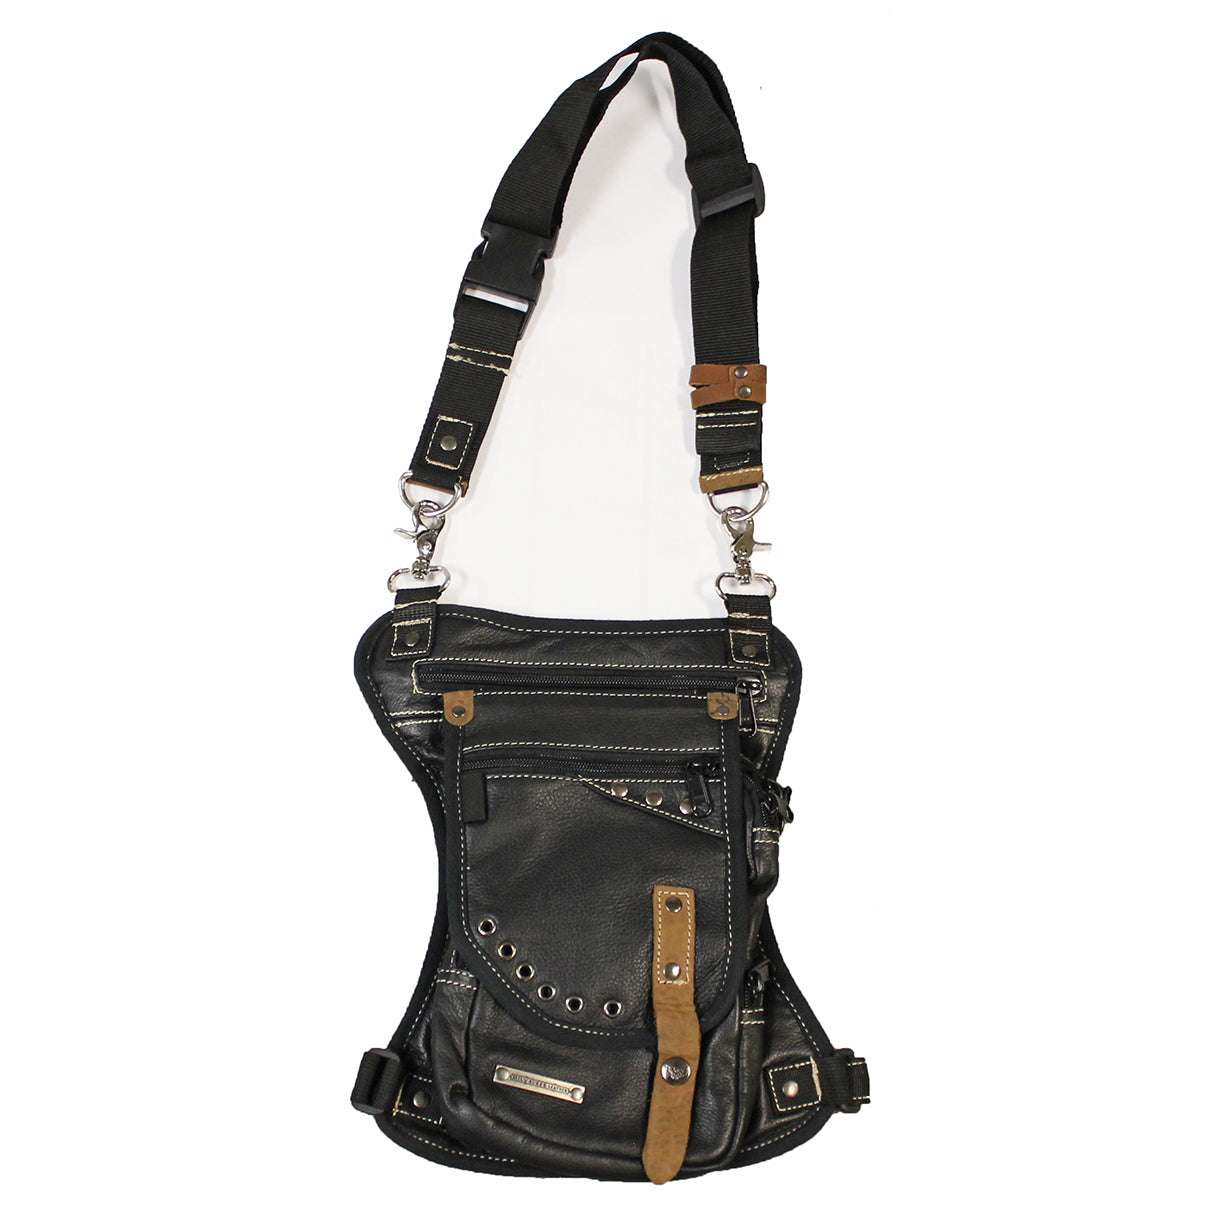 Grommet Detail Leather Thigh Bag with Waist Belt